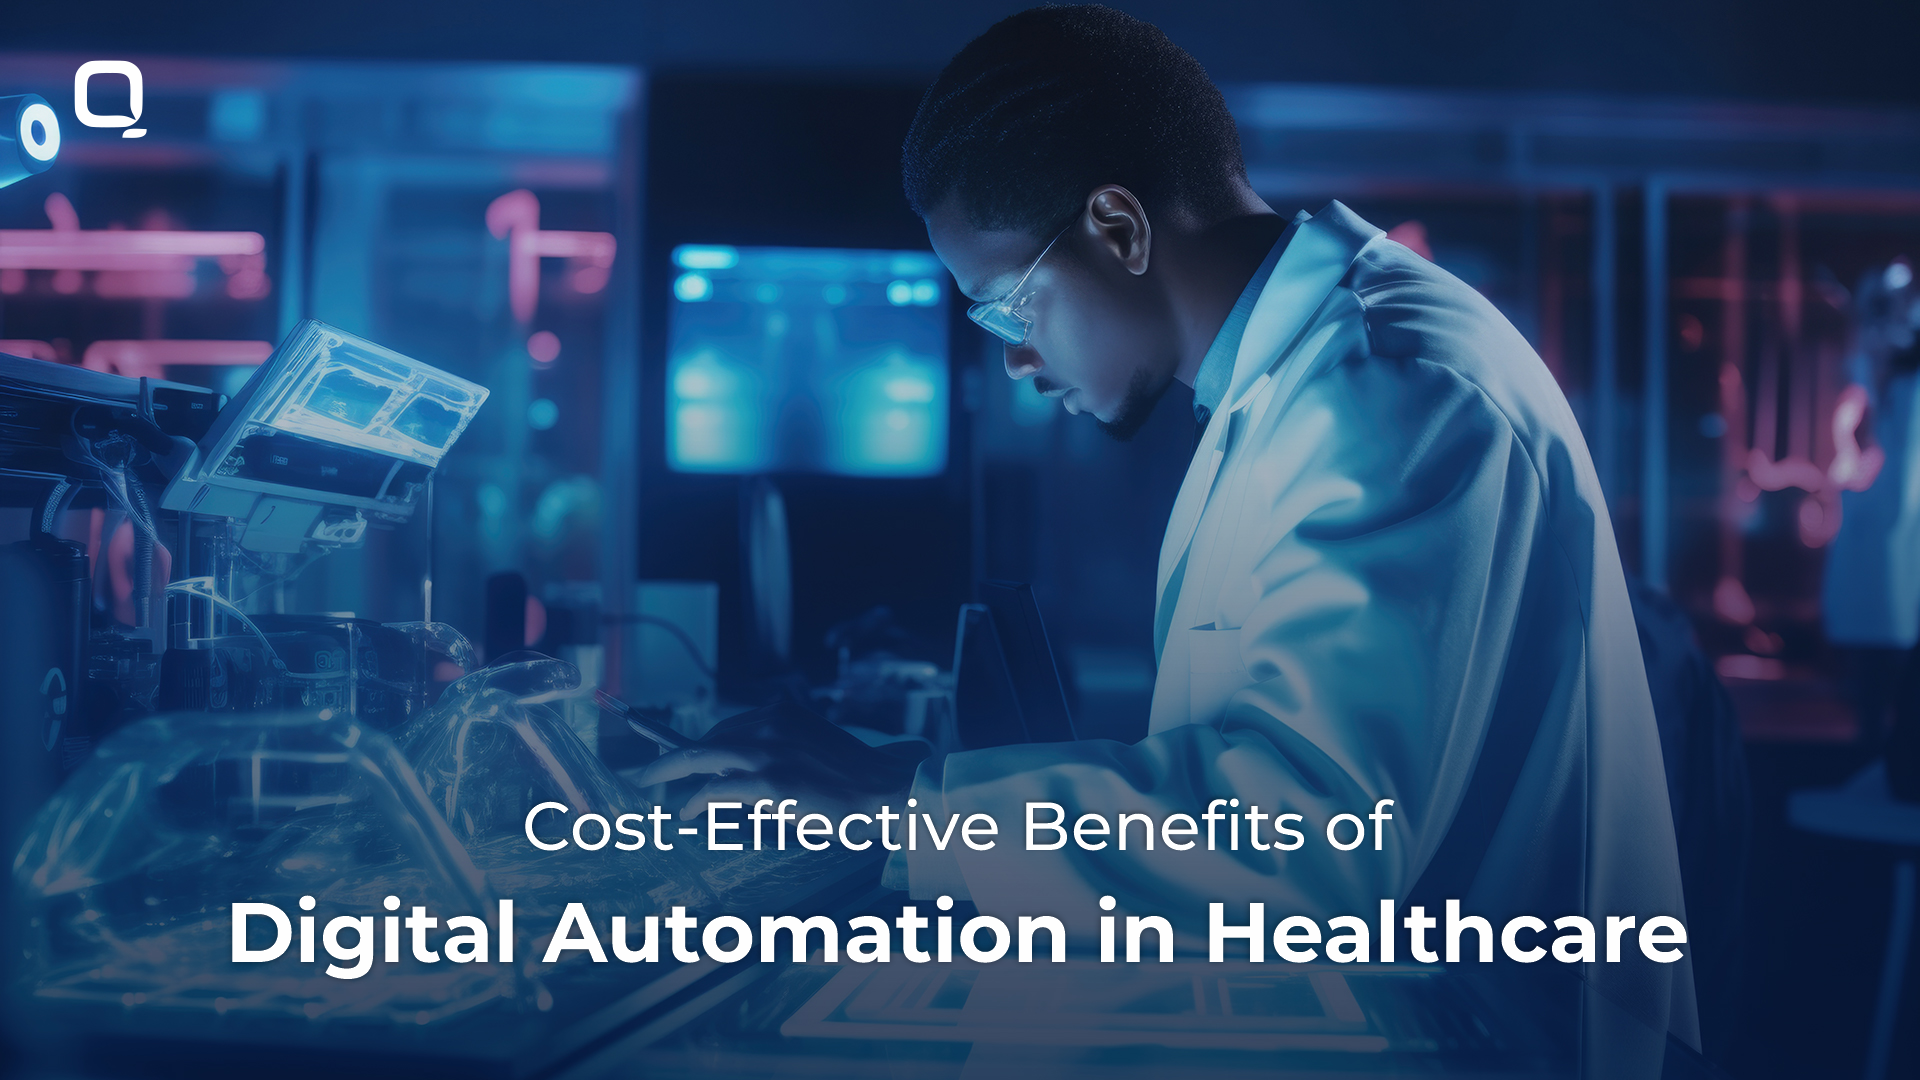 Digital automation in healthcare